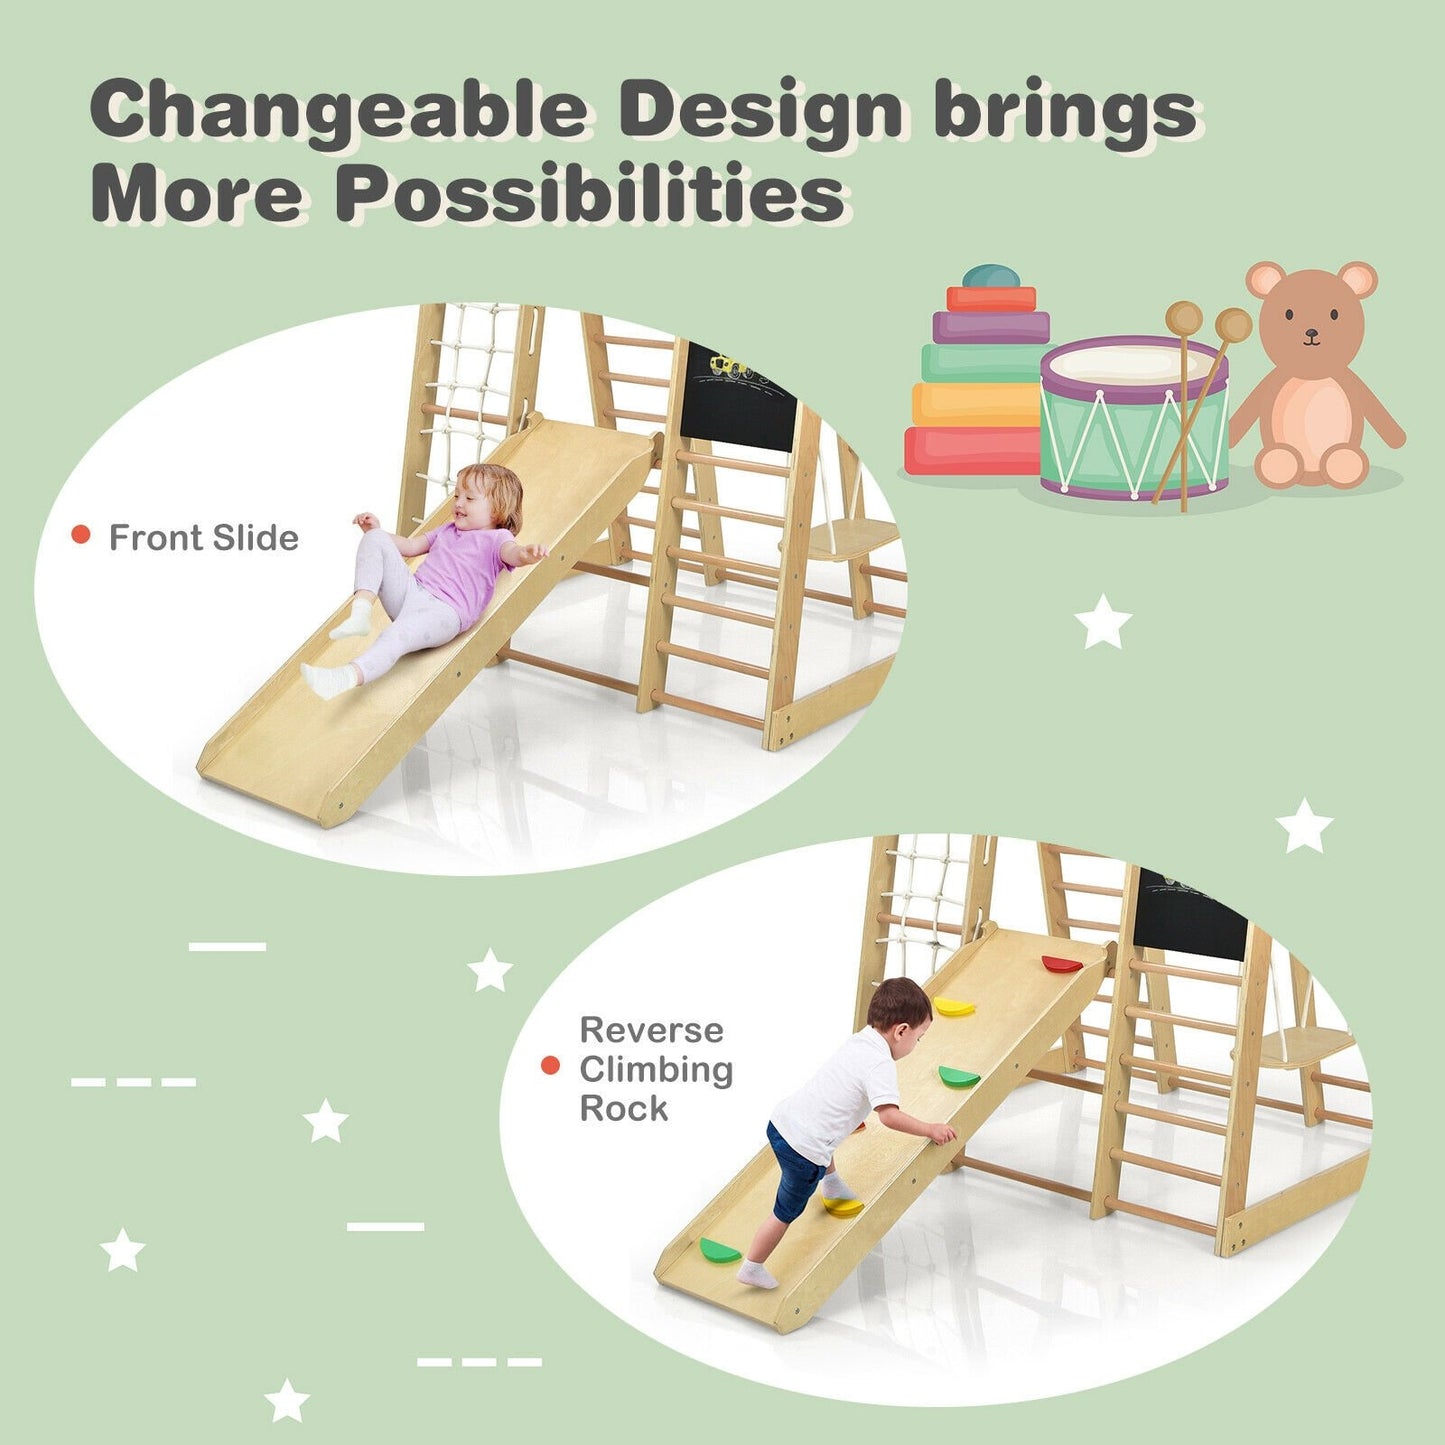 Indoor Playground Climbing Gym Wooden 8-in-1 Climber Playset for Children, Natural